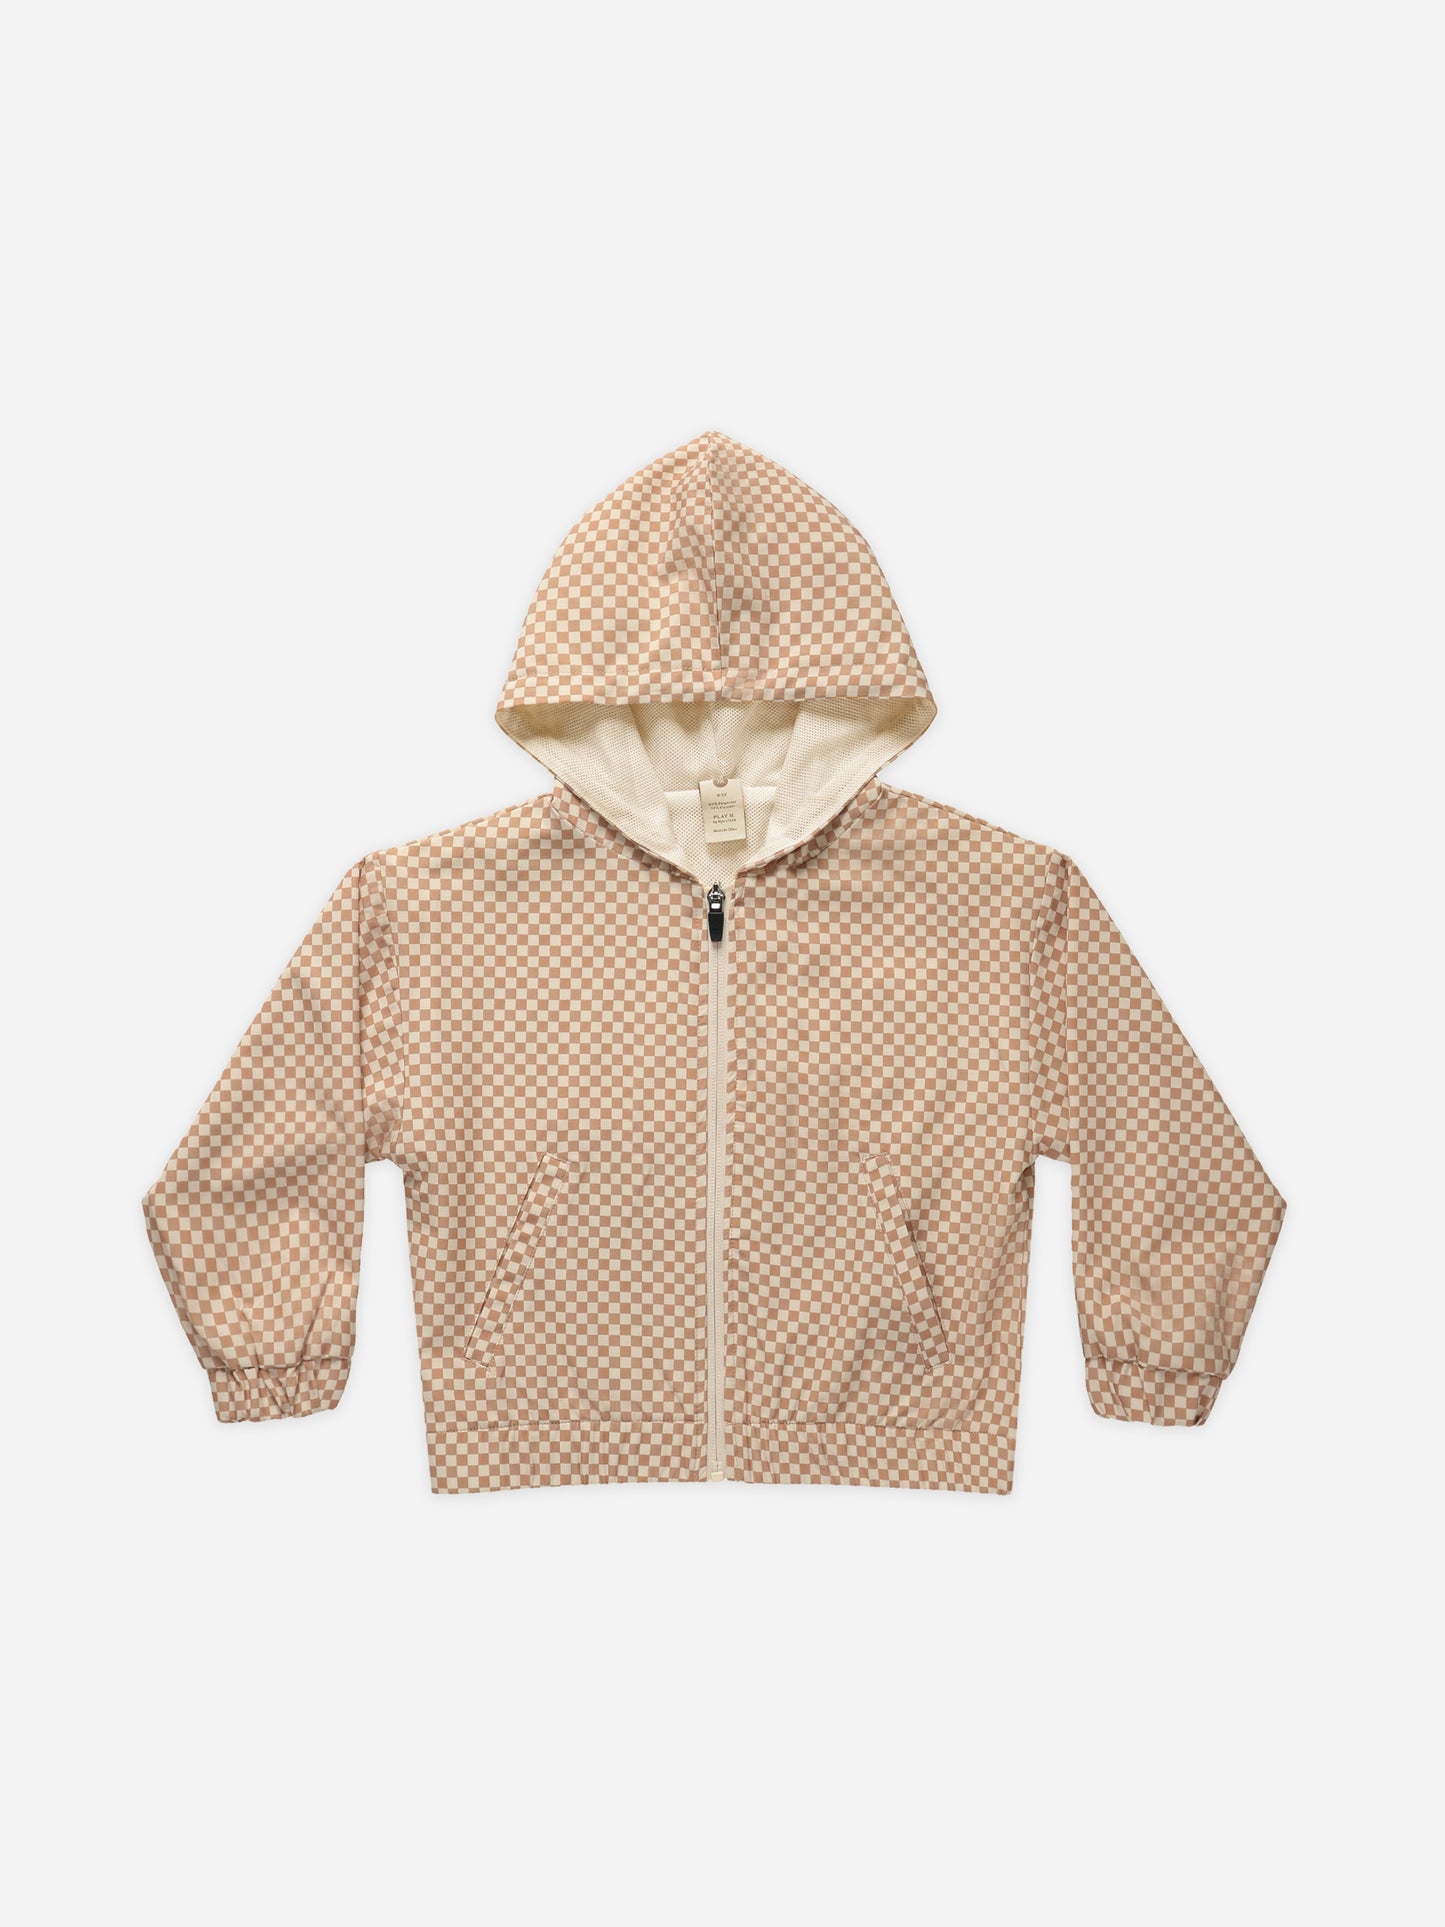 Hooded Windbreaker || Clay Micro Check - Rylee + Cru | Kids Clothes | Trendy Baby Clothes | Modern Infant Outfits |